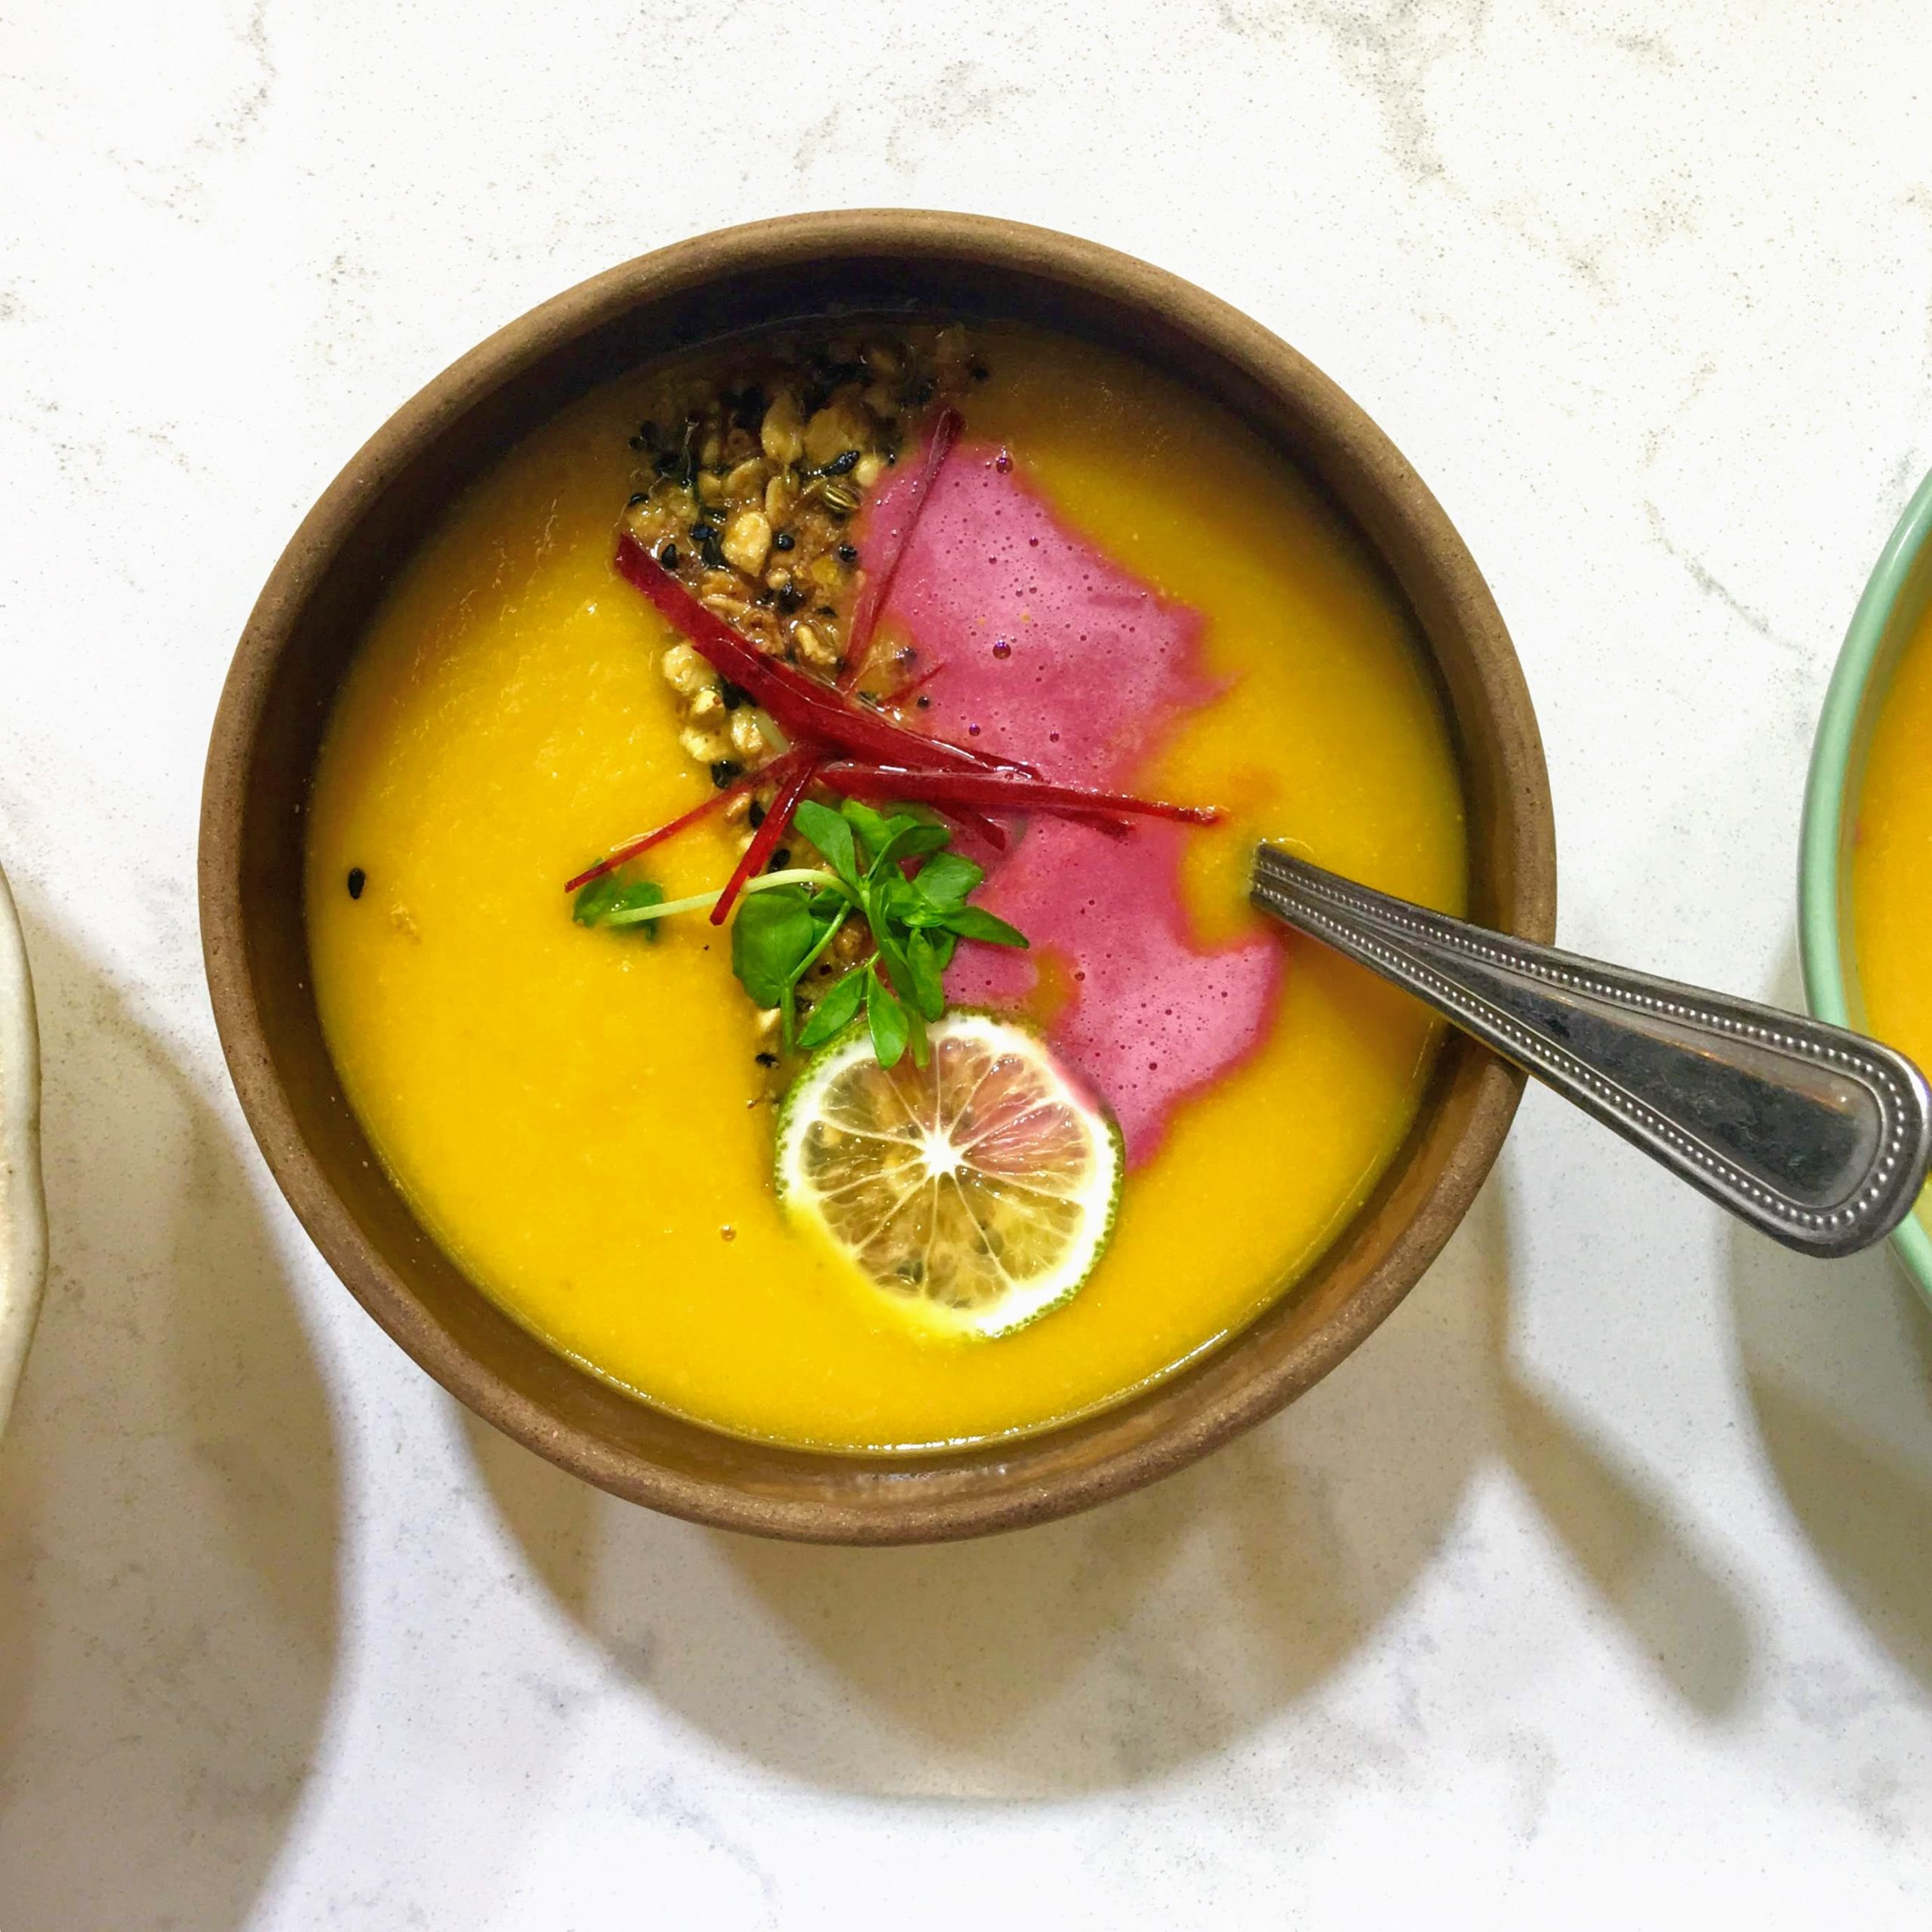 https://goodly.ca/wp-content/uploads/2020/12/Carrot-Pear-Soup-with-Dukkah-Granola-scaled.jpg